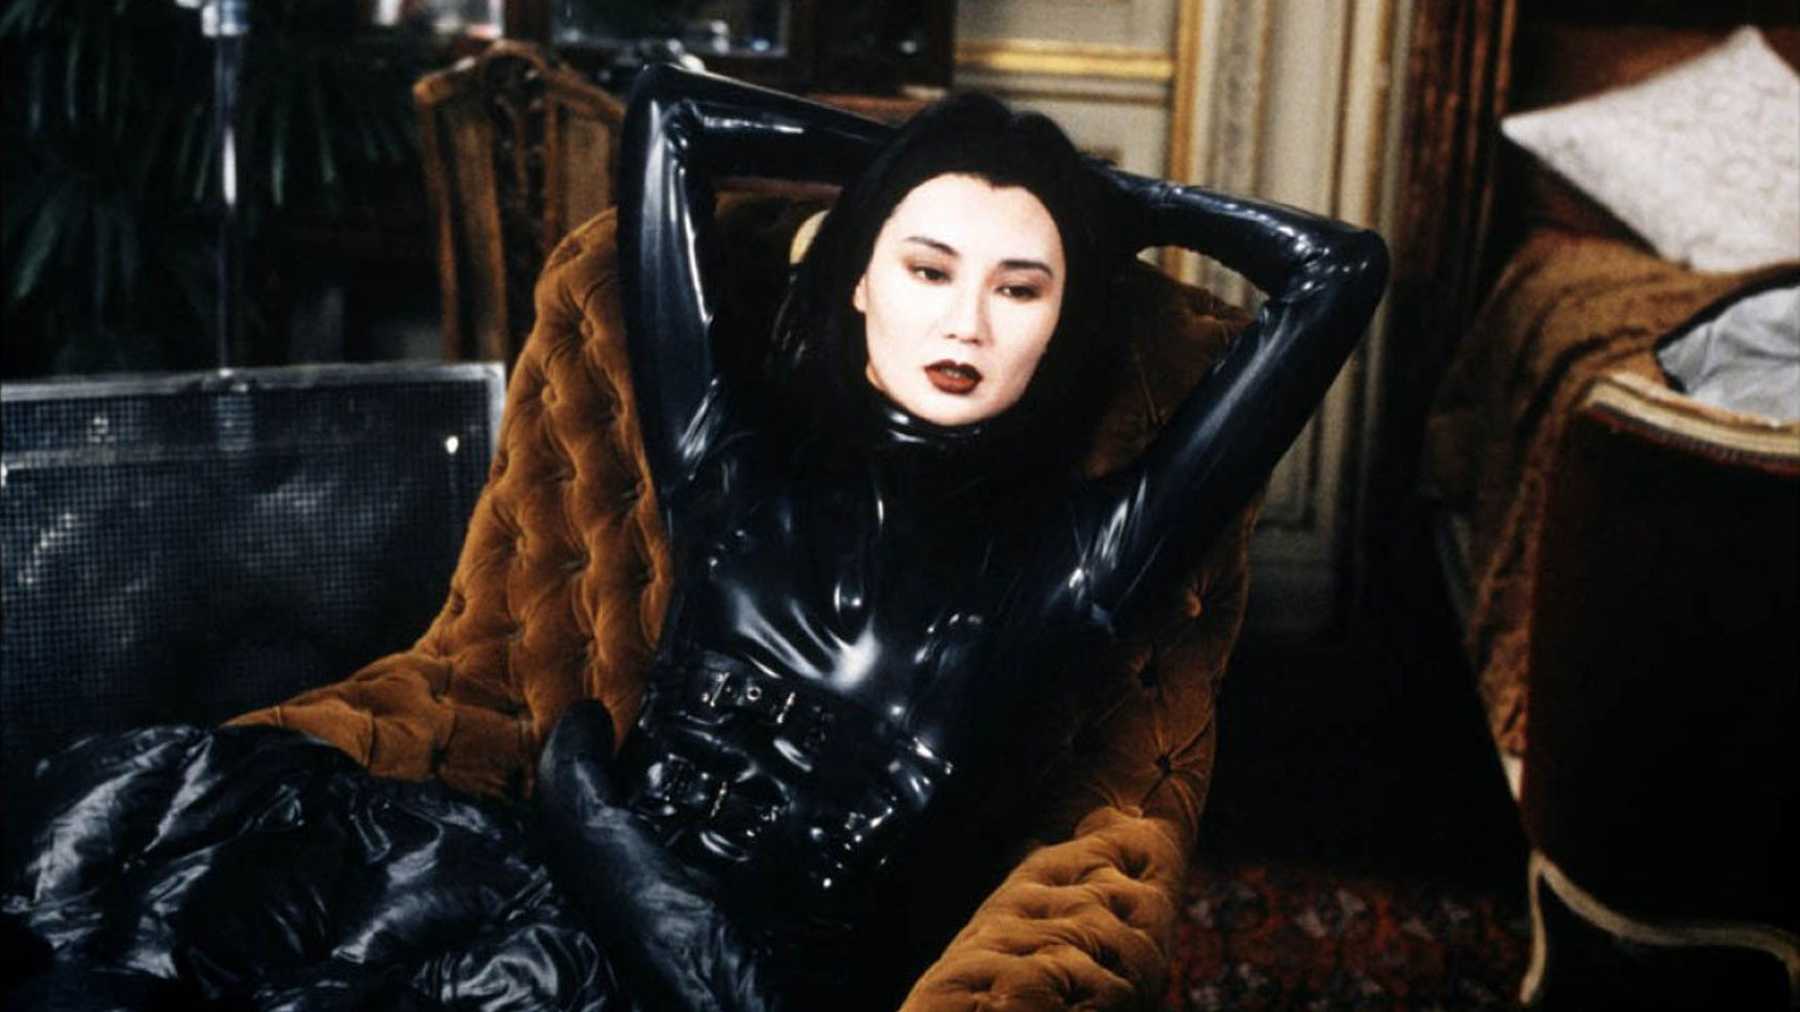 a woman in a leather catsuit lounges in an orange chair with her hands behind her head